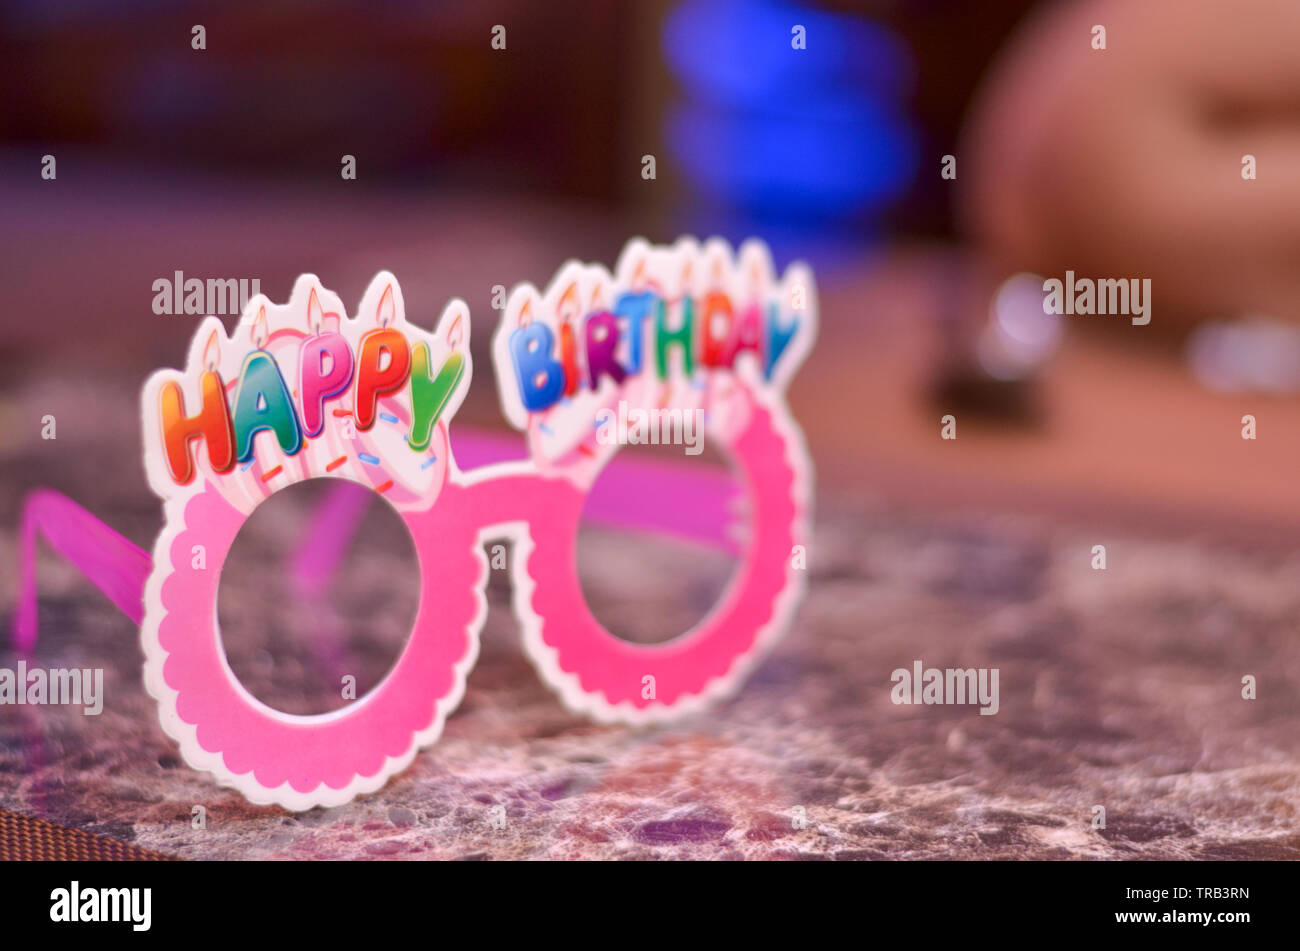 Pink goggles / specs made of cardboard / paper with happy birthday written on top. Stock Photo